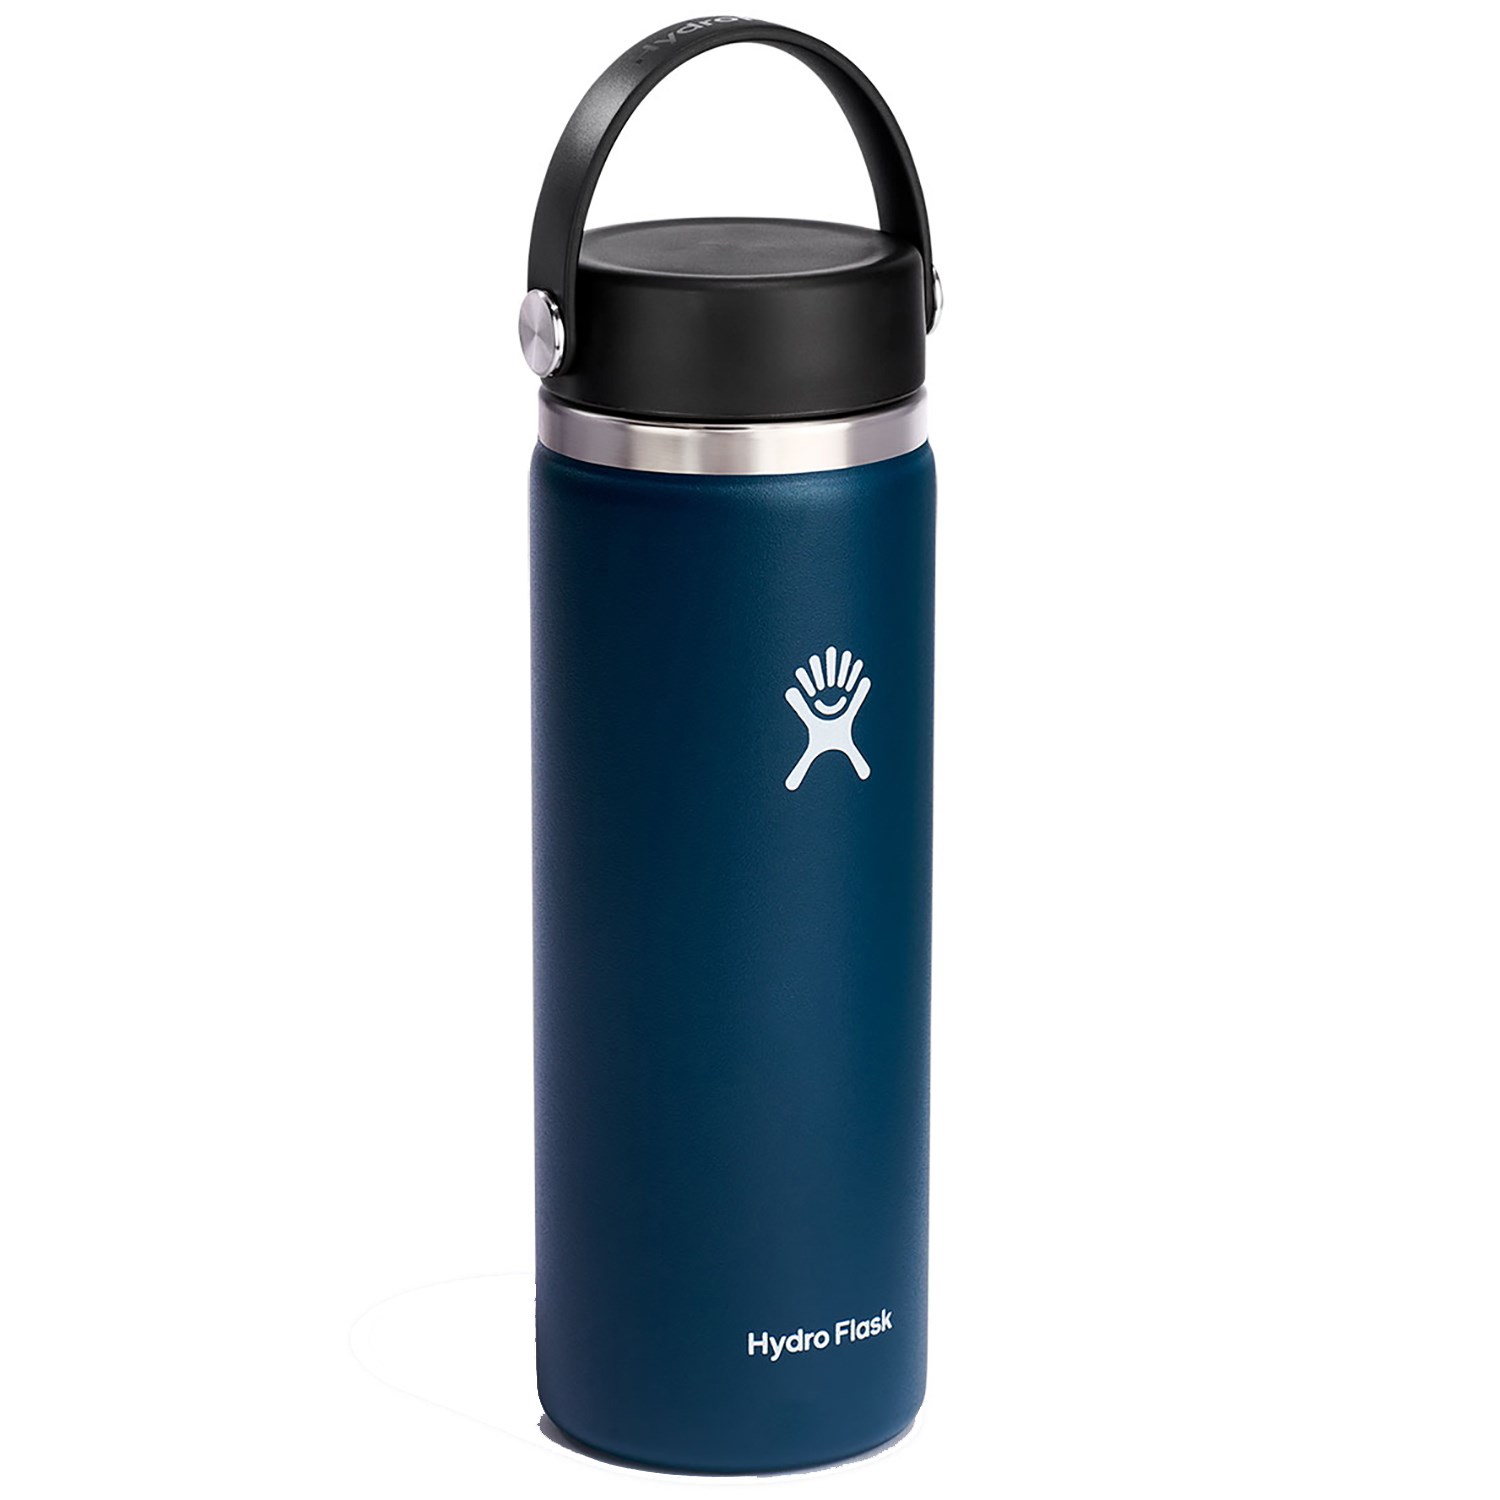 https://images.evo.com/imgp/zoom/167433/941187/hydro-flask-20oz-wide-mouth-water-bottle-.jpg